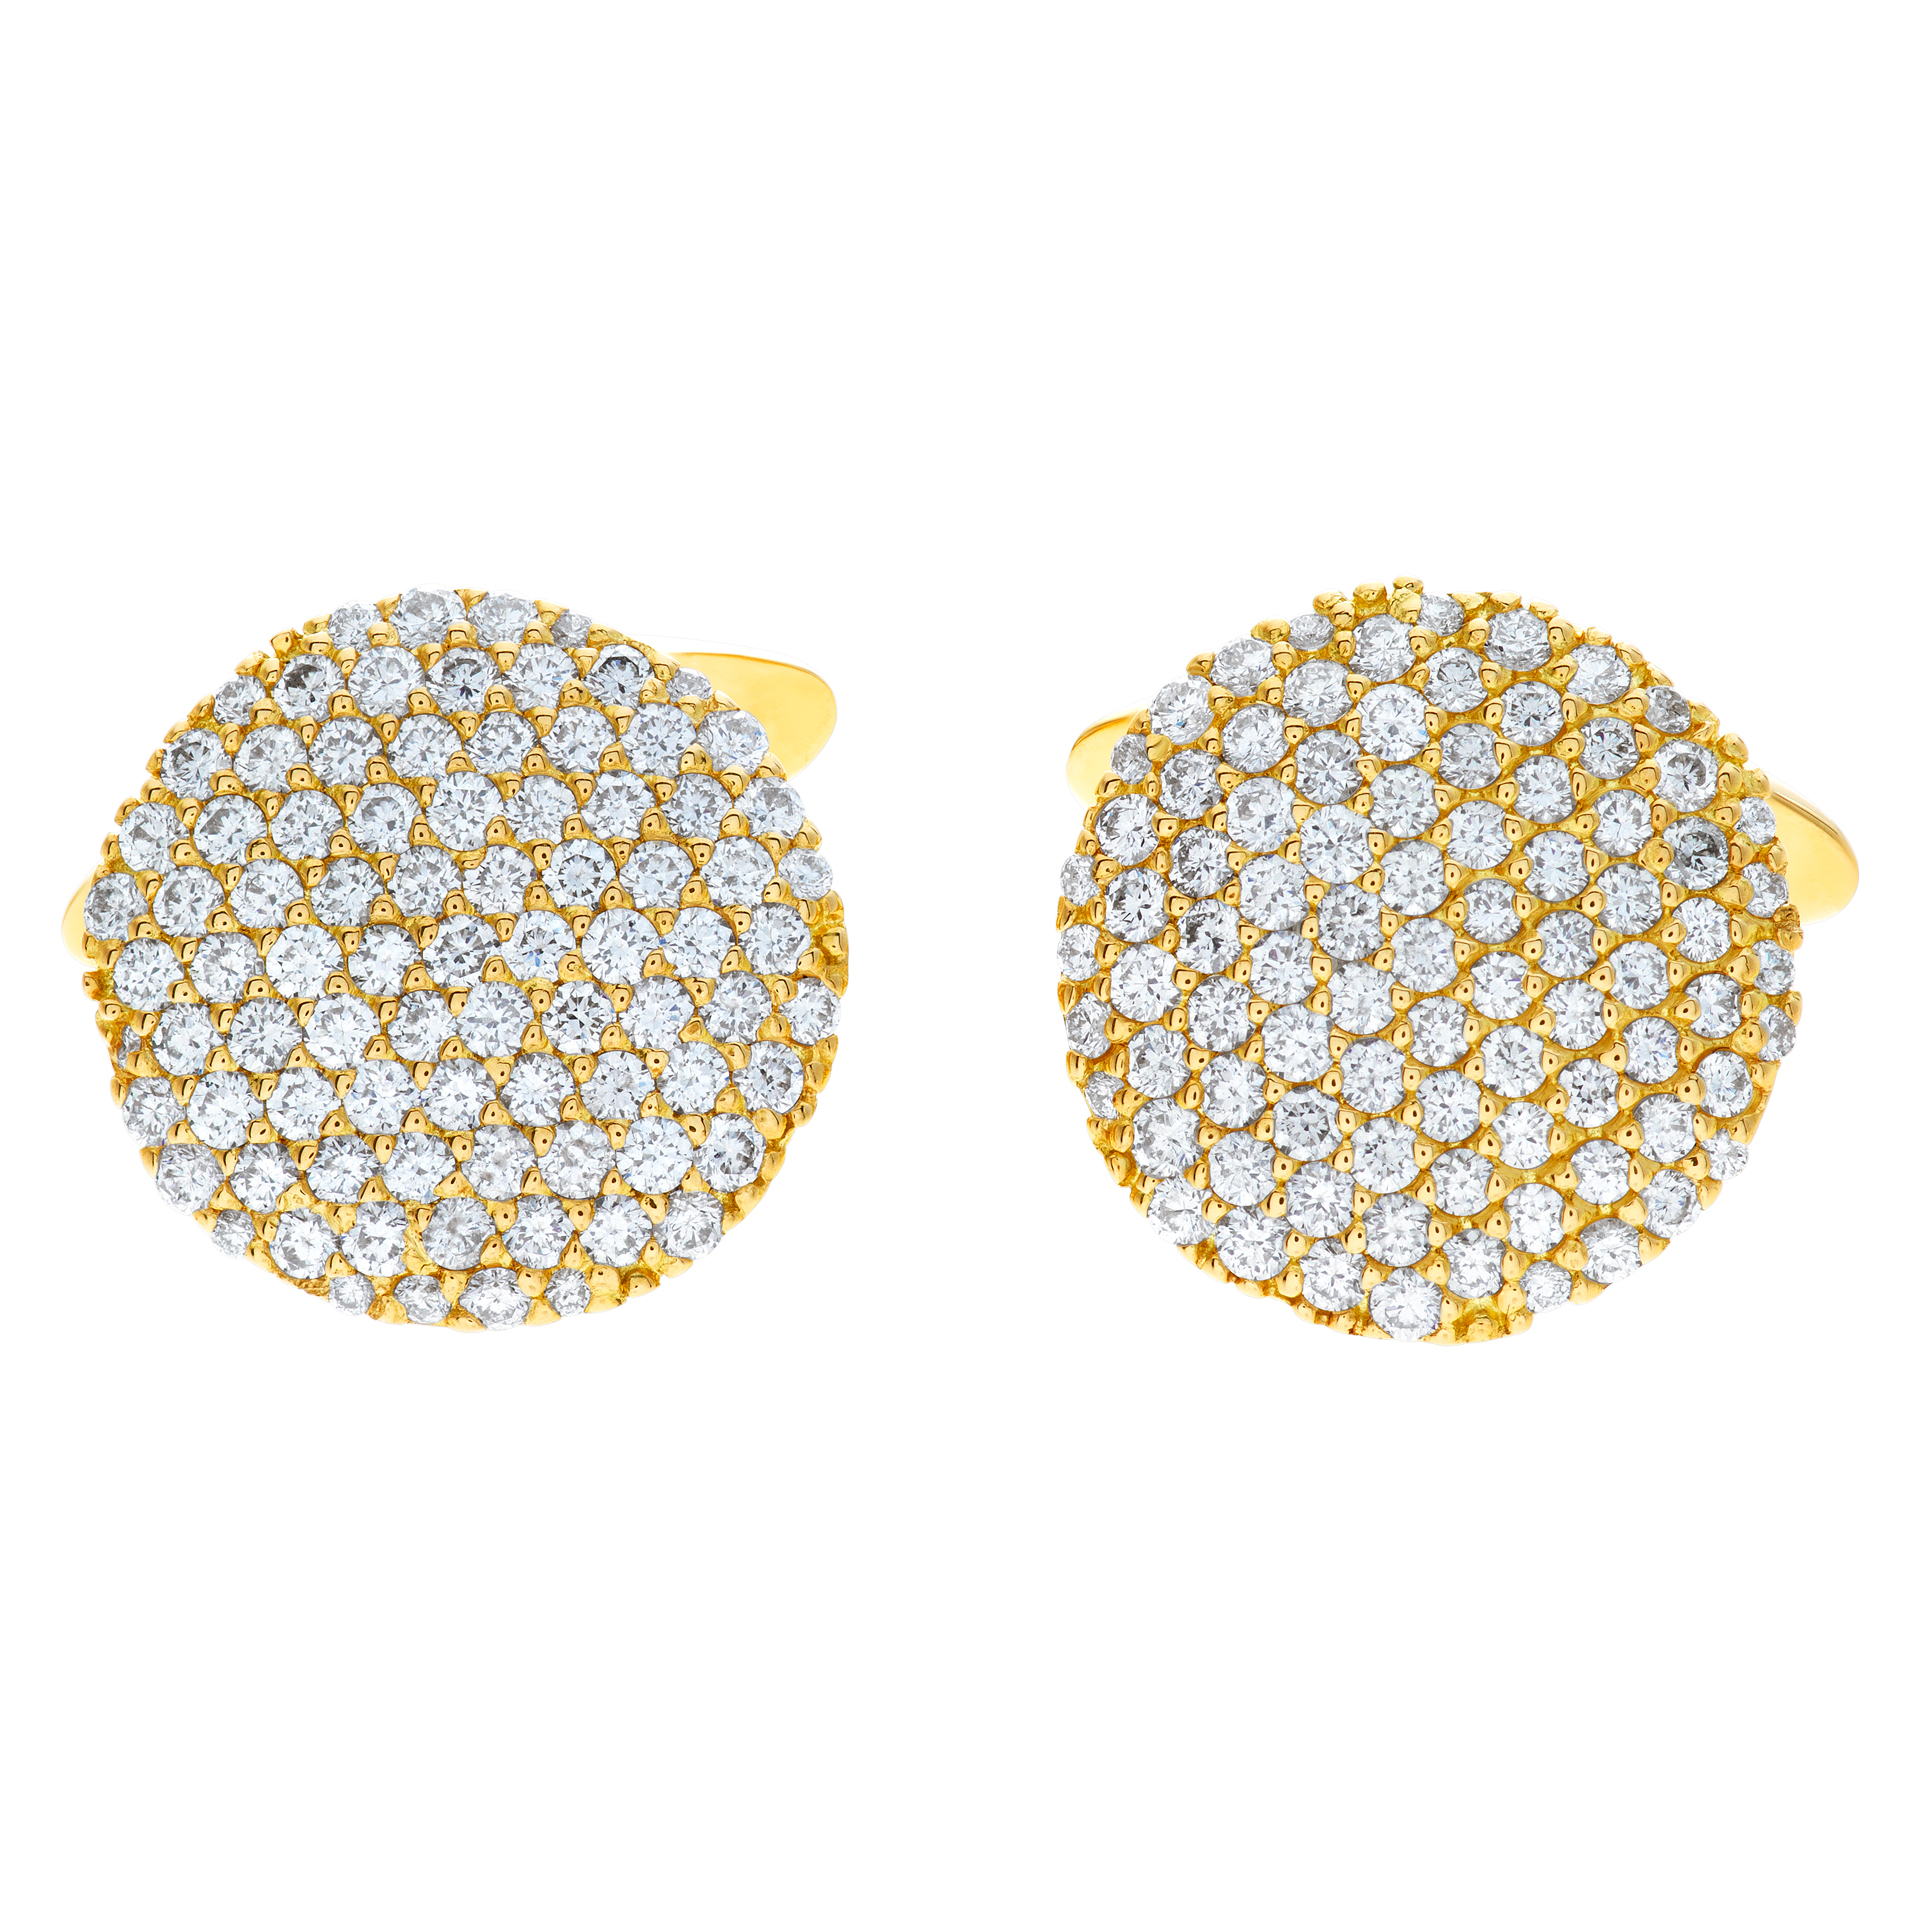 18k yellow gold pave set circle cufflinks with 2.5 carats in diamonds image 1